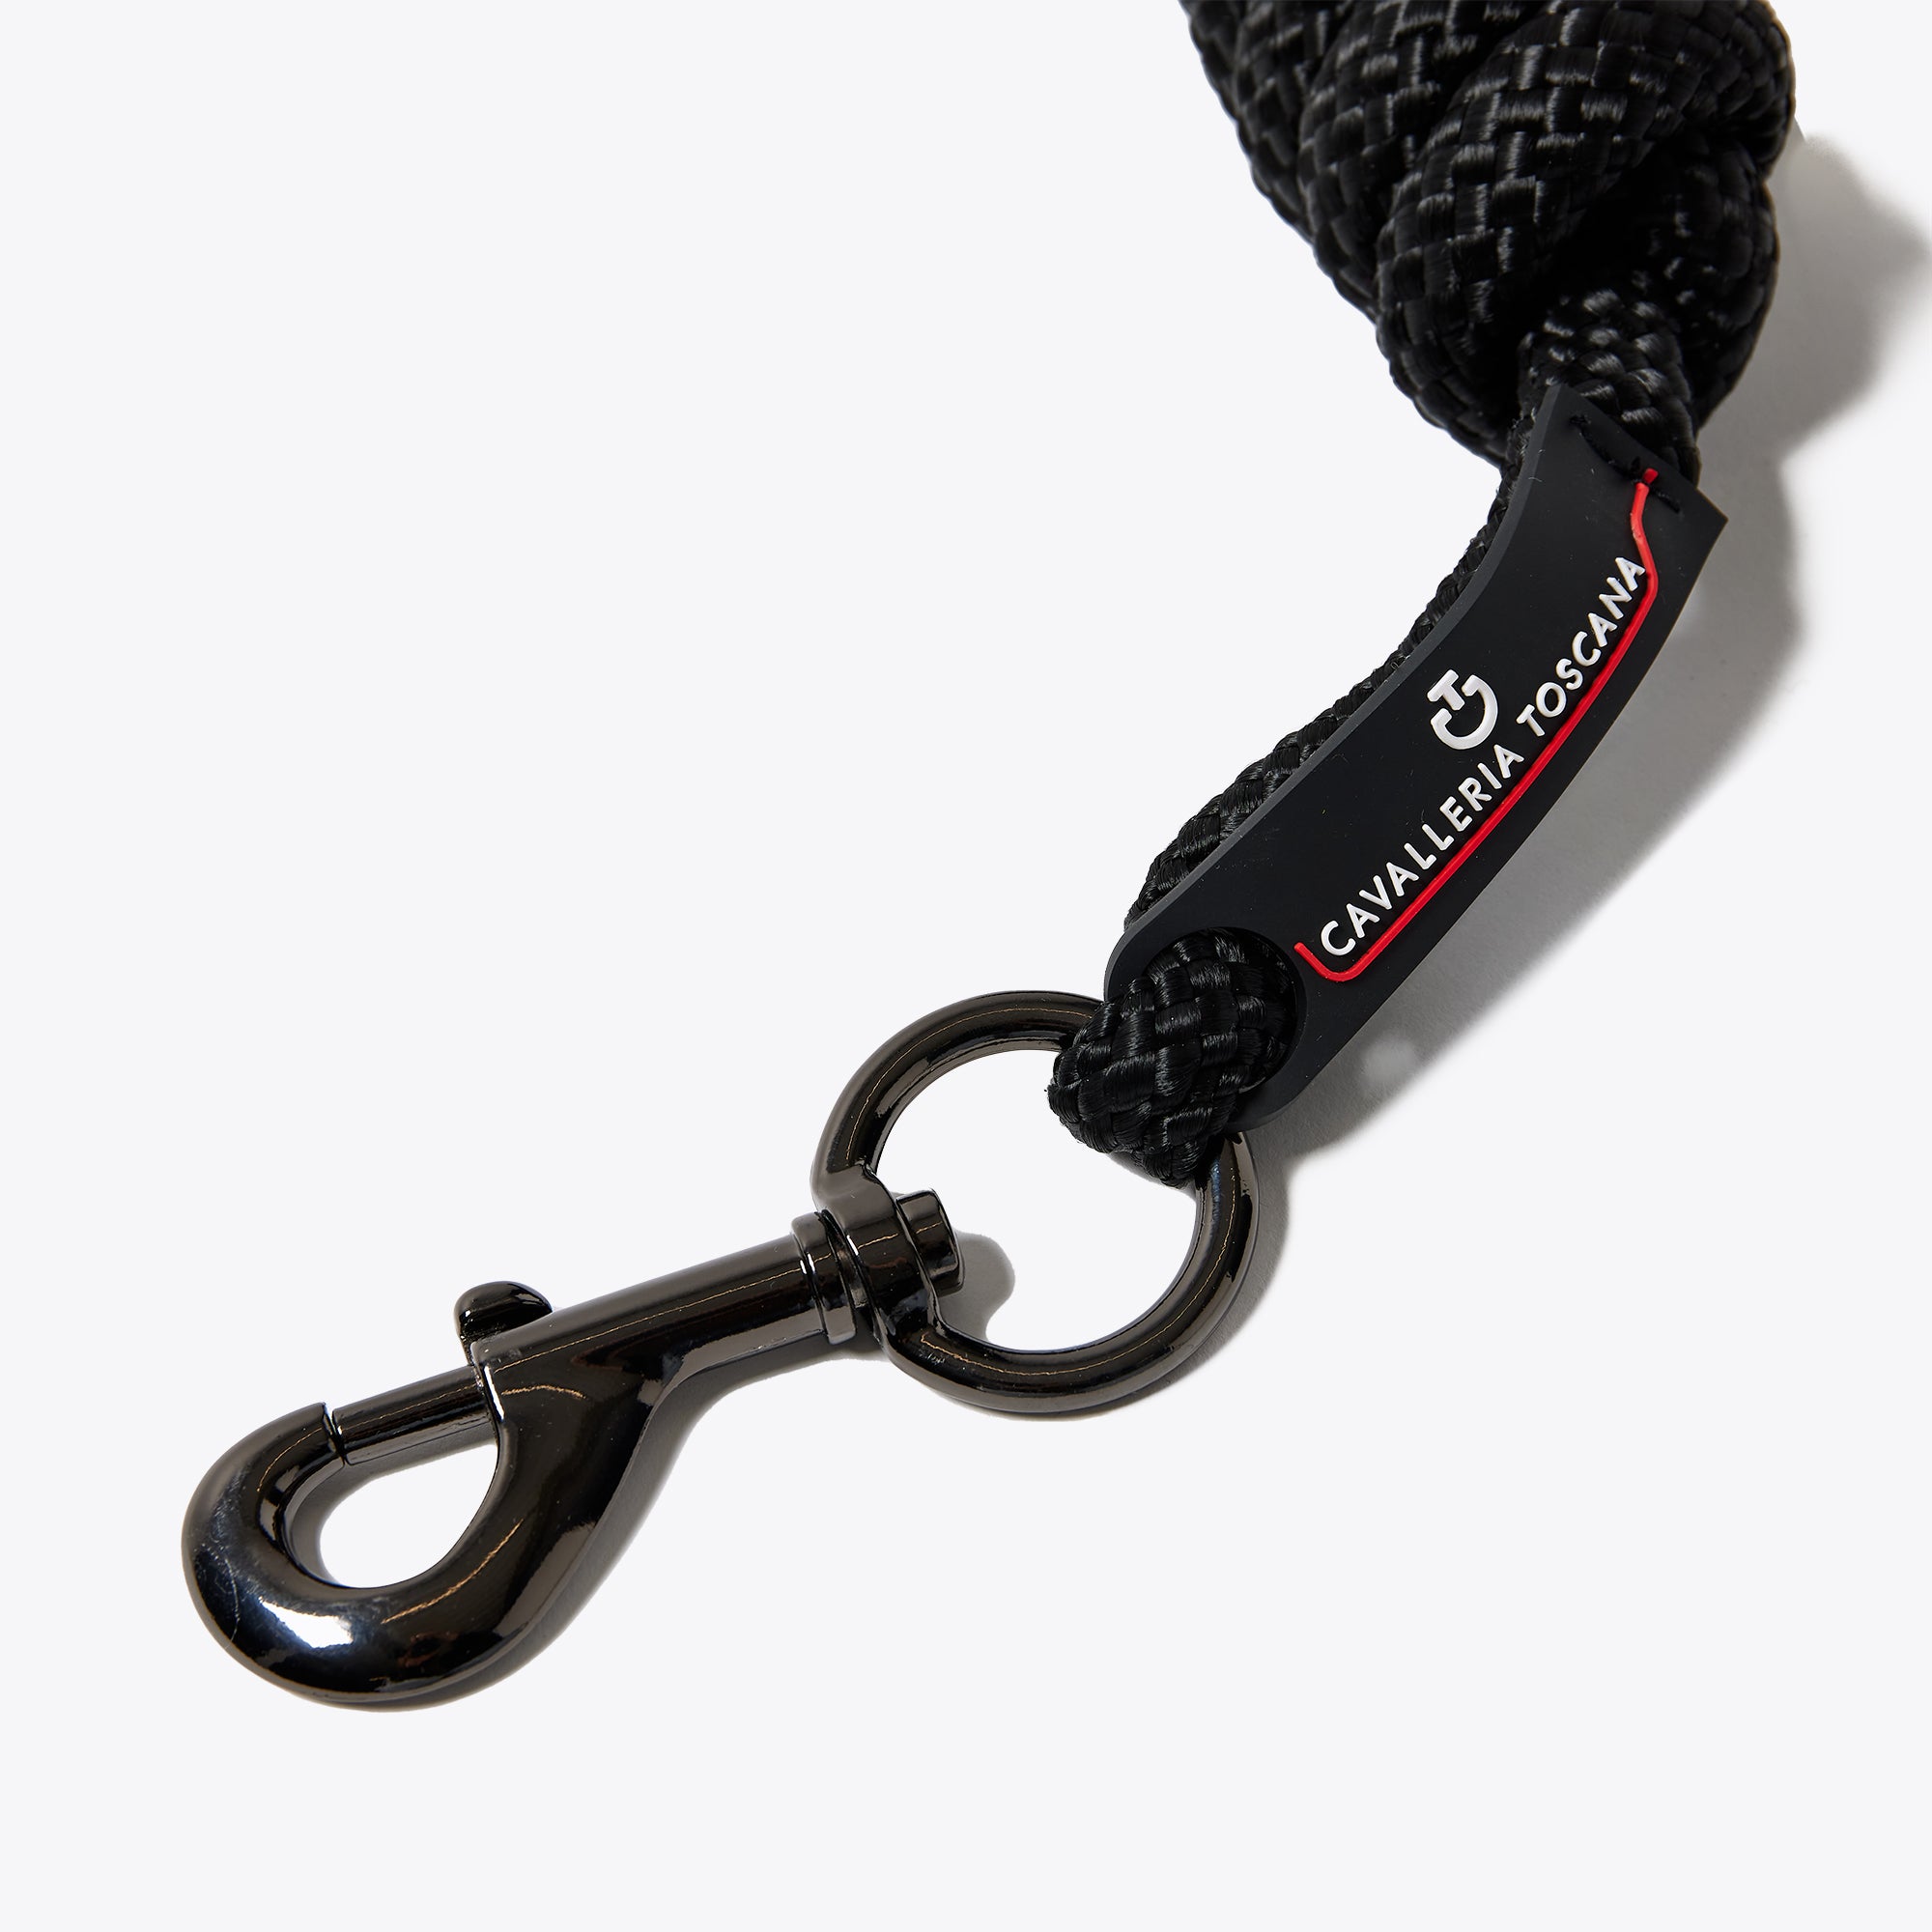 Lead rope with Cavalleria Toscana rubber insert and metal carabiner.